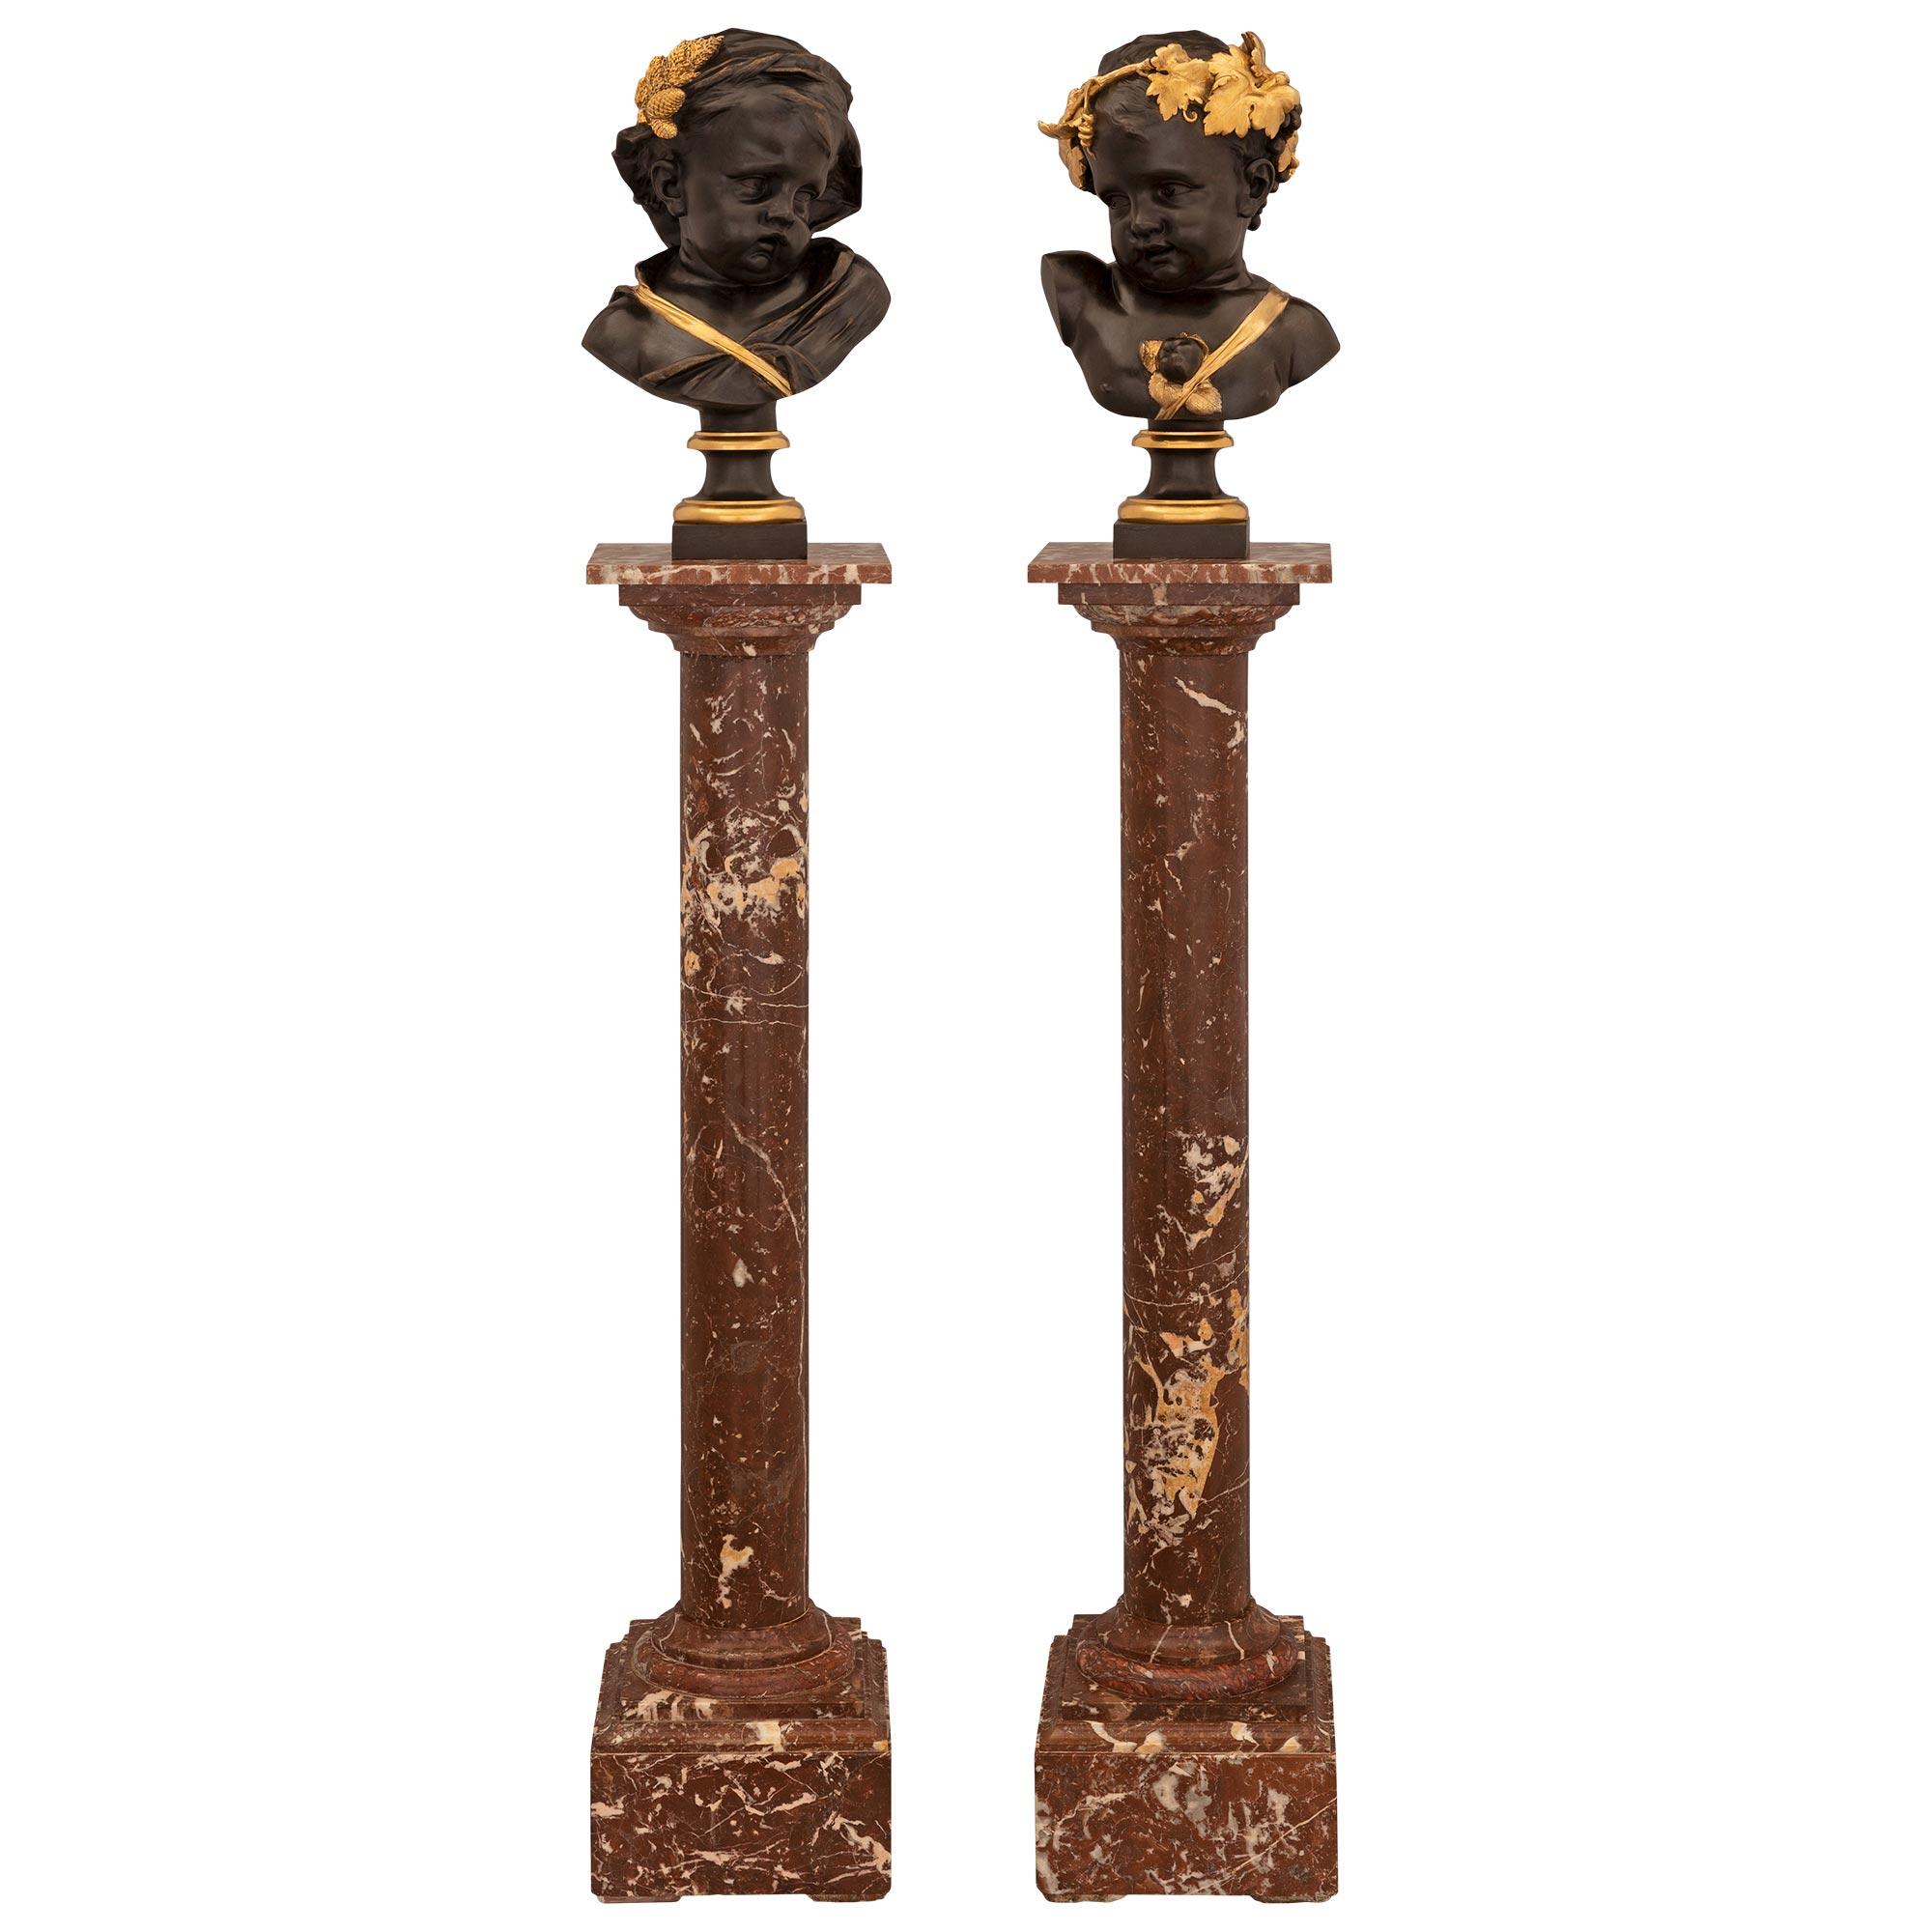 A striking and most elegant pair of French 19th century Louis XVI st. patinated bronze and ormolu cherub bust on their original Coquiller de Bilbao marble pedestal columns. Each column is raised by a square base with a fine mottled border and a